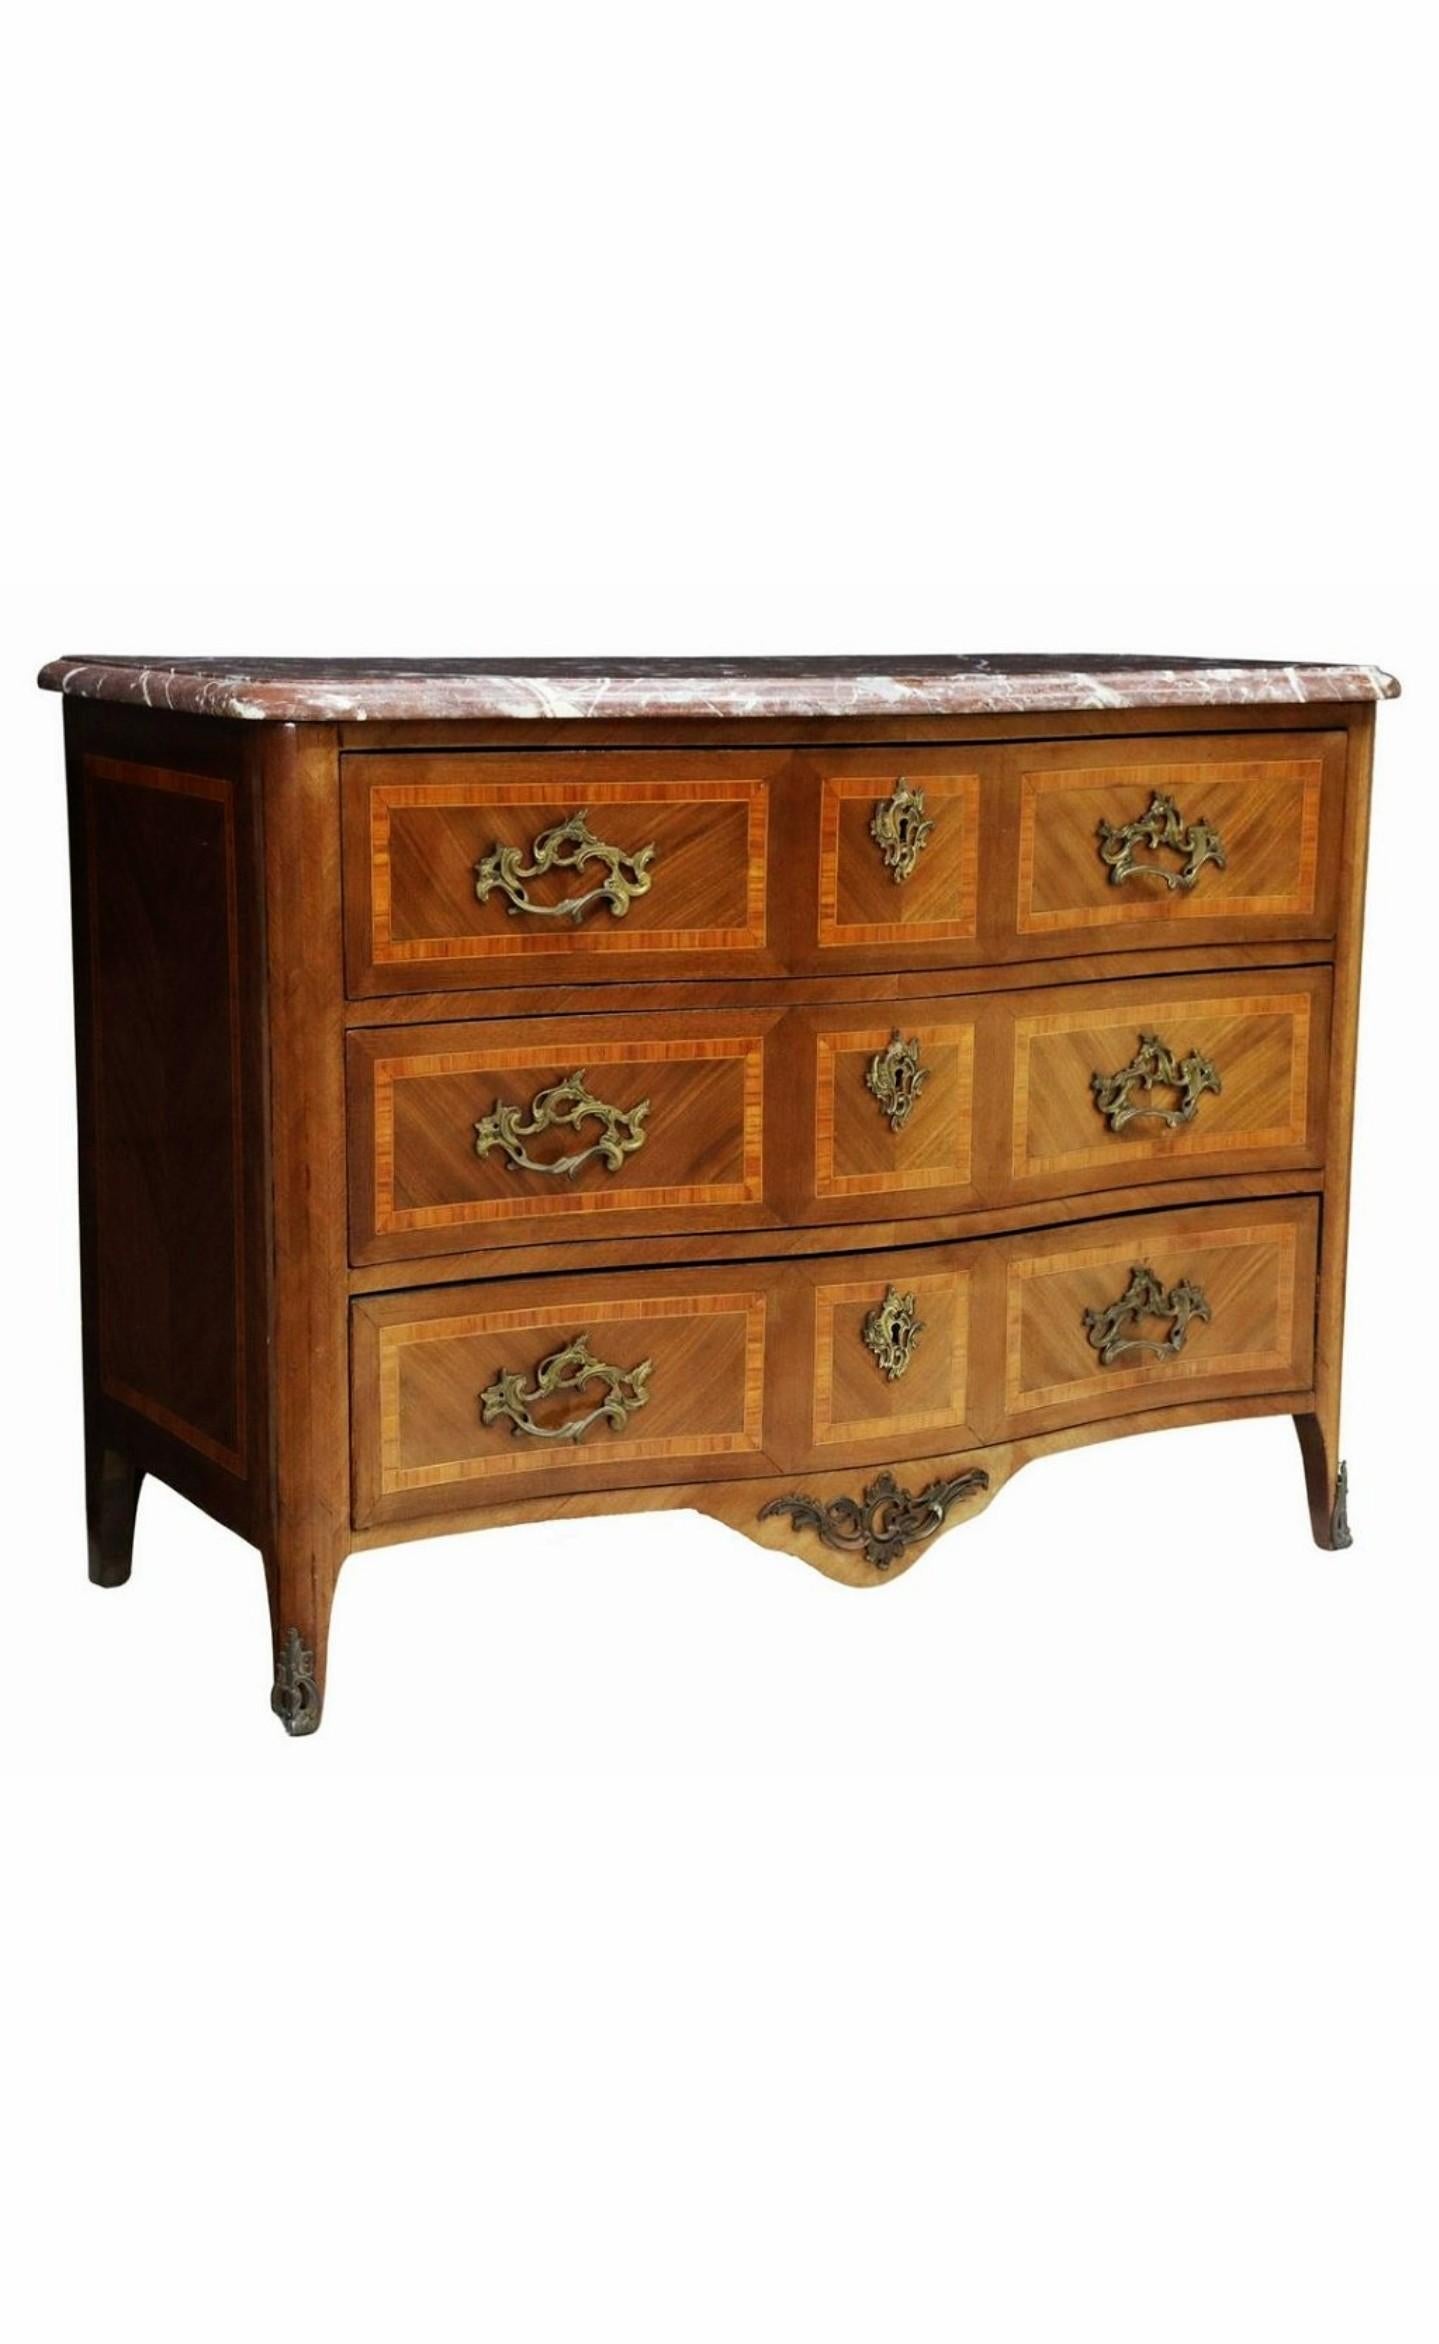 A fine French antique, circa 1900, Transitional Louis XV - XVI style marble-top chest of drawers commode. 

Hand-crafted in France in the early 20th century, exceptionally executed in 18th century Regence taste, of excellent quality, craftsmanship